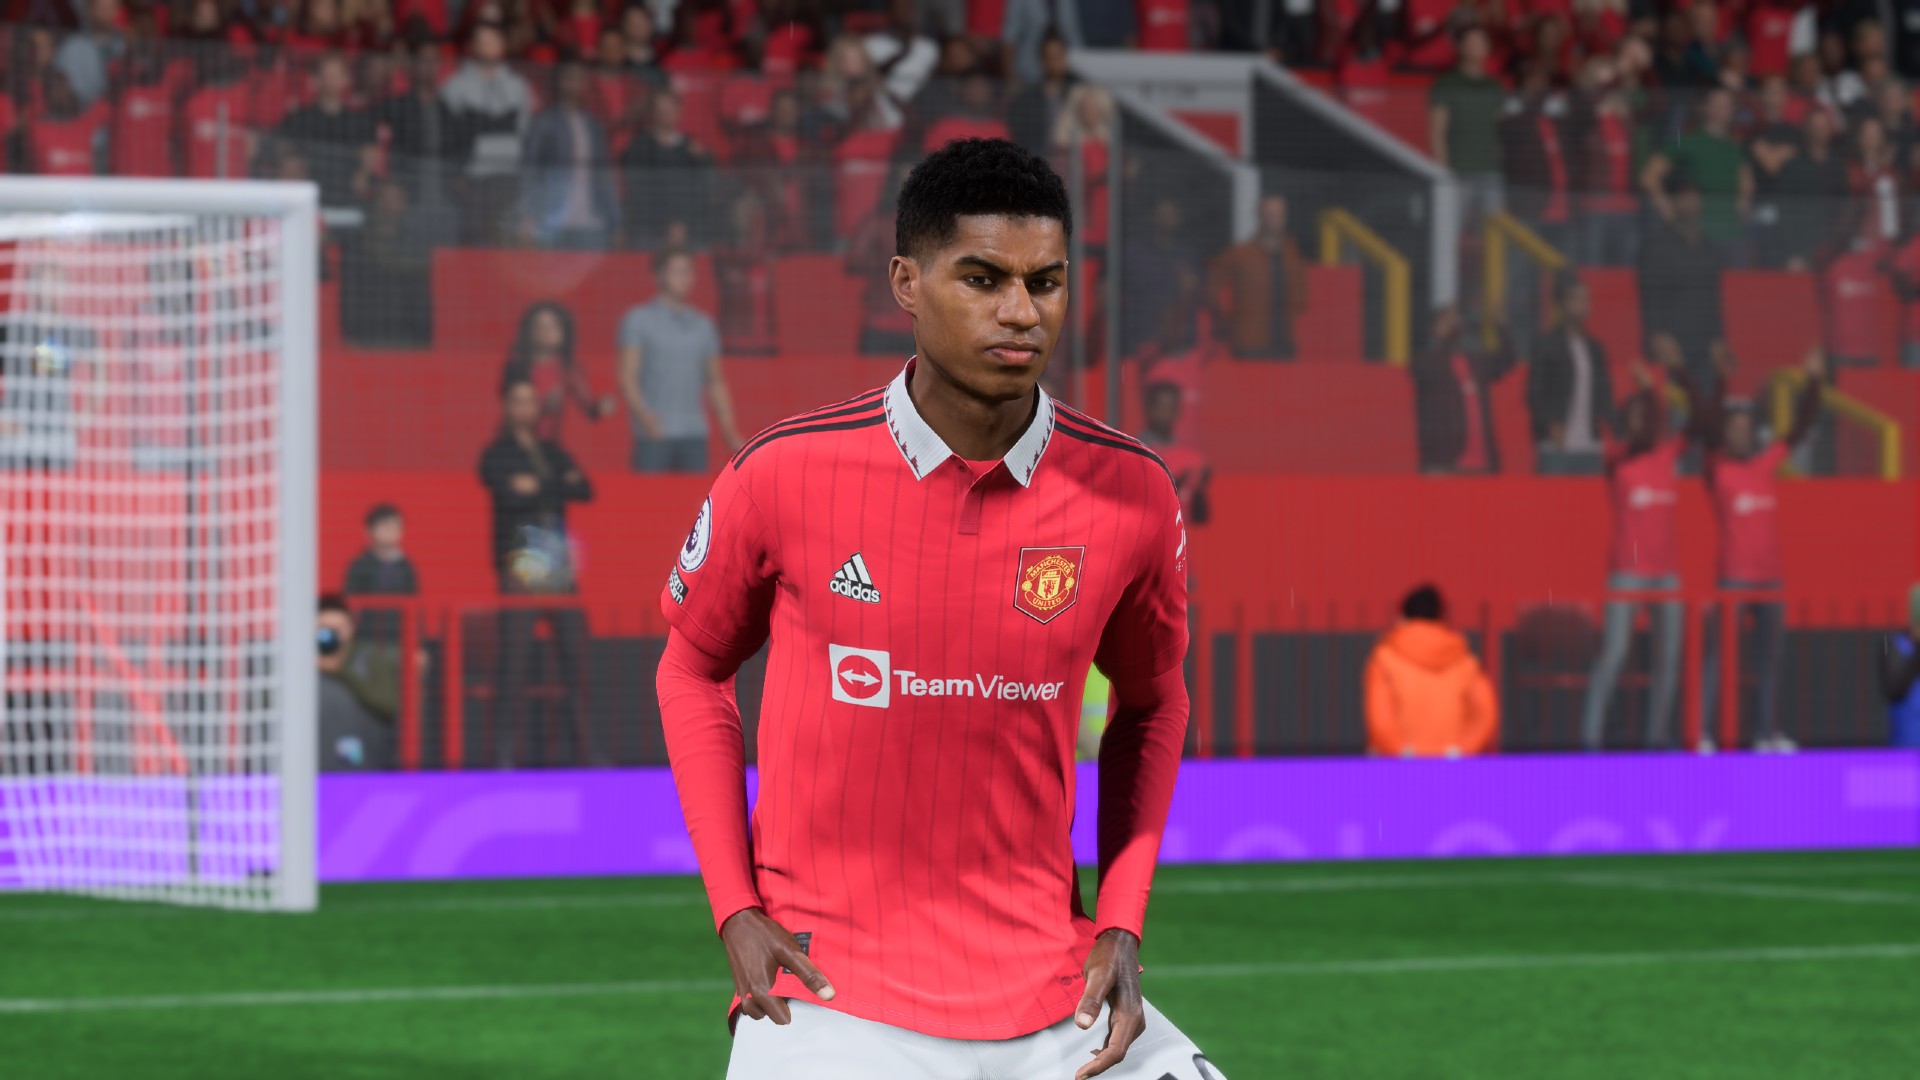 FIFA 23 trading methods and tips to earn coins fast